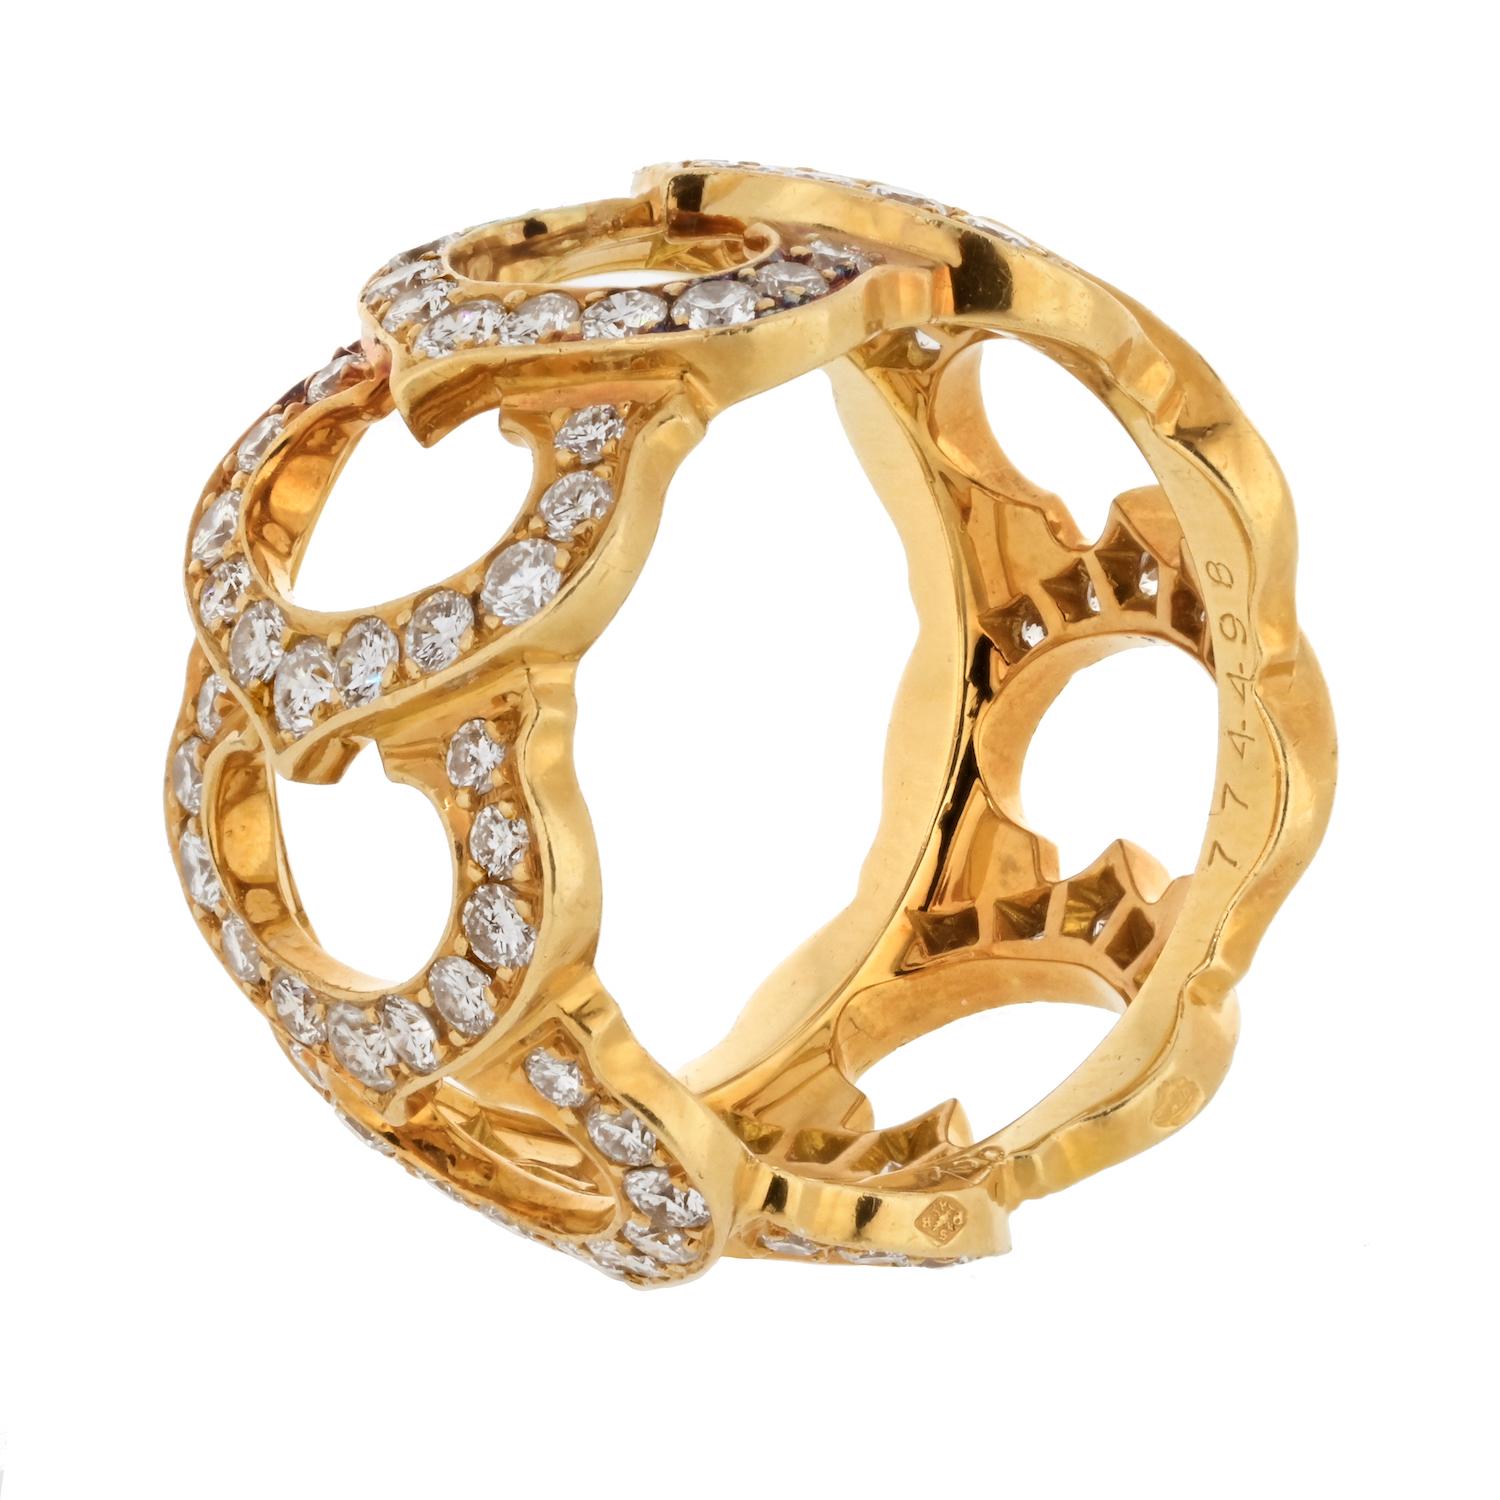 Cartier 18K Yellow Gold Diamond C De Cartier Ring EU 55 In Excellent Condition For Sale In New York, NY